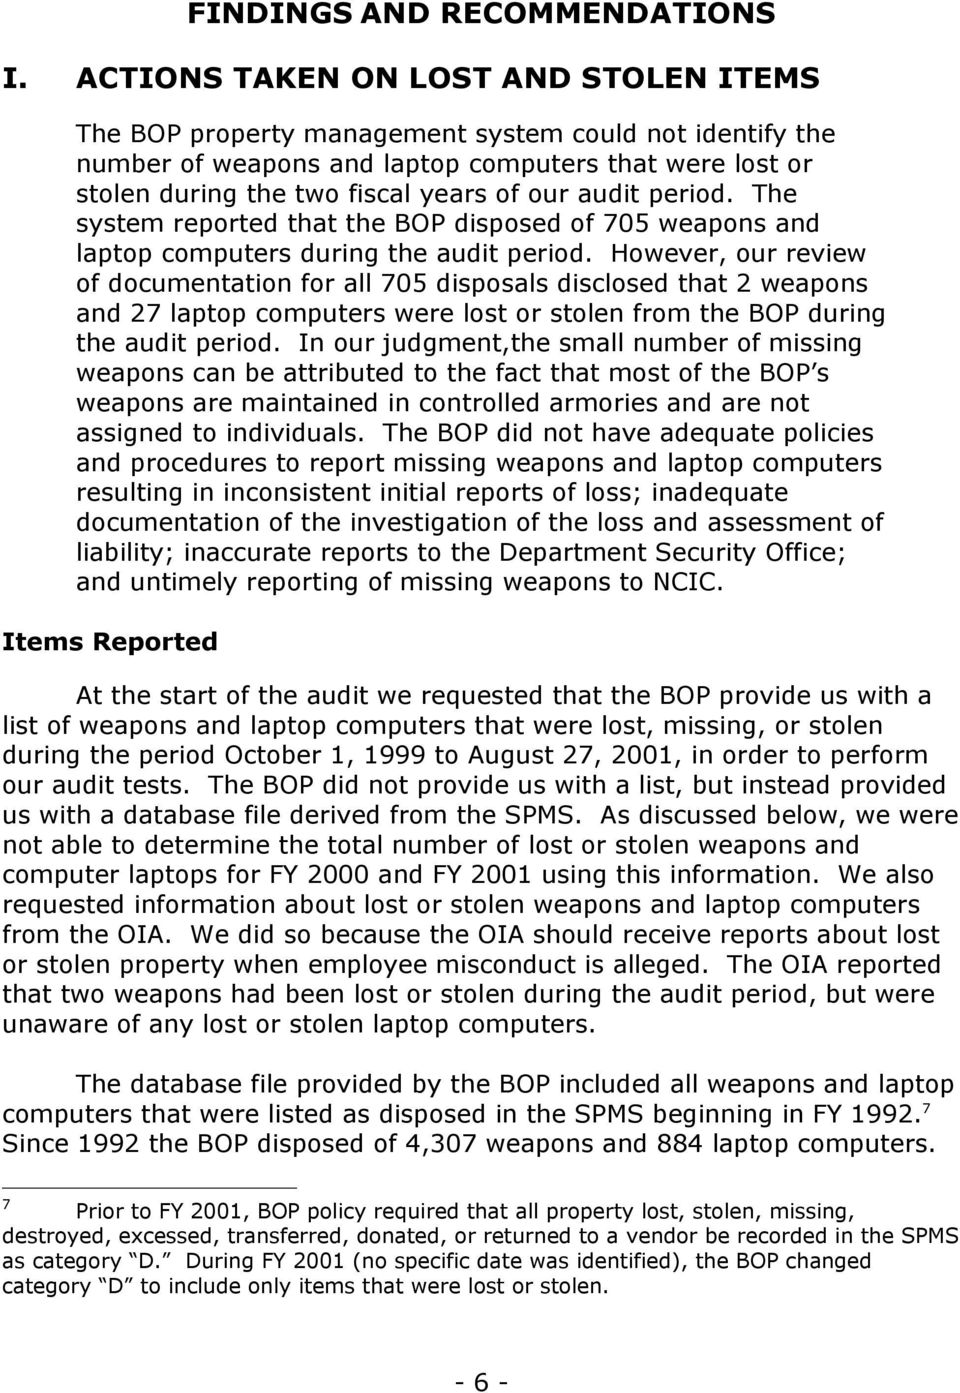 audit period. The system reported that the BOP disposed of 705 weapons and laptop computers during the audit period.